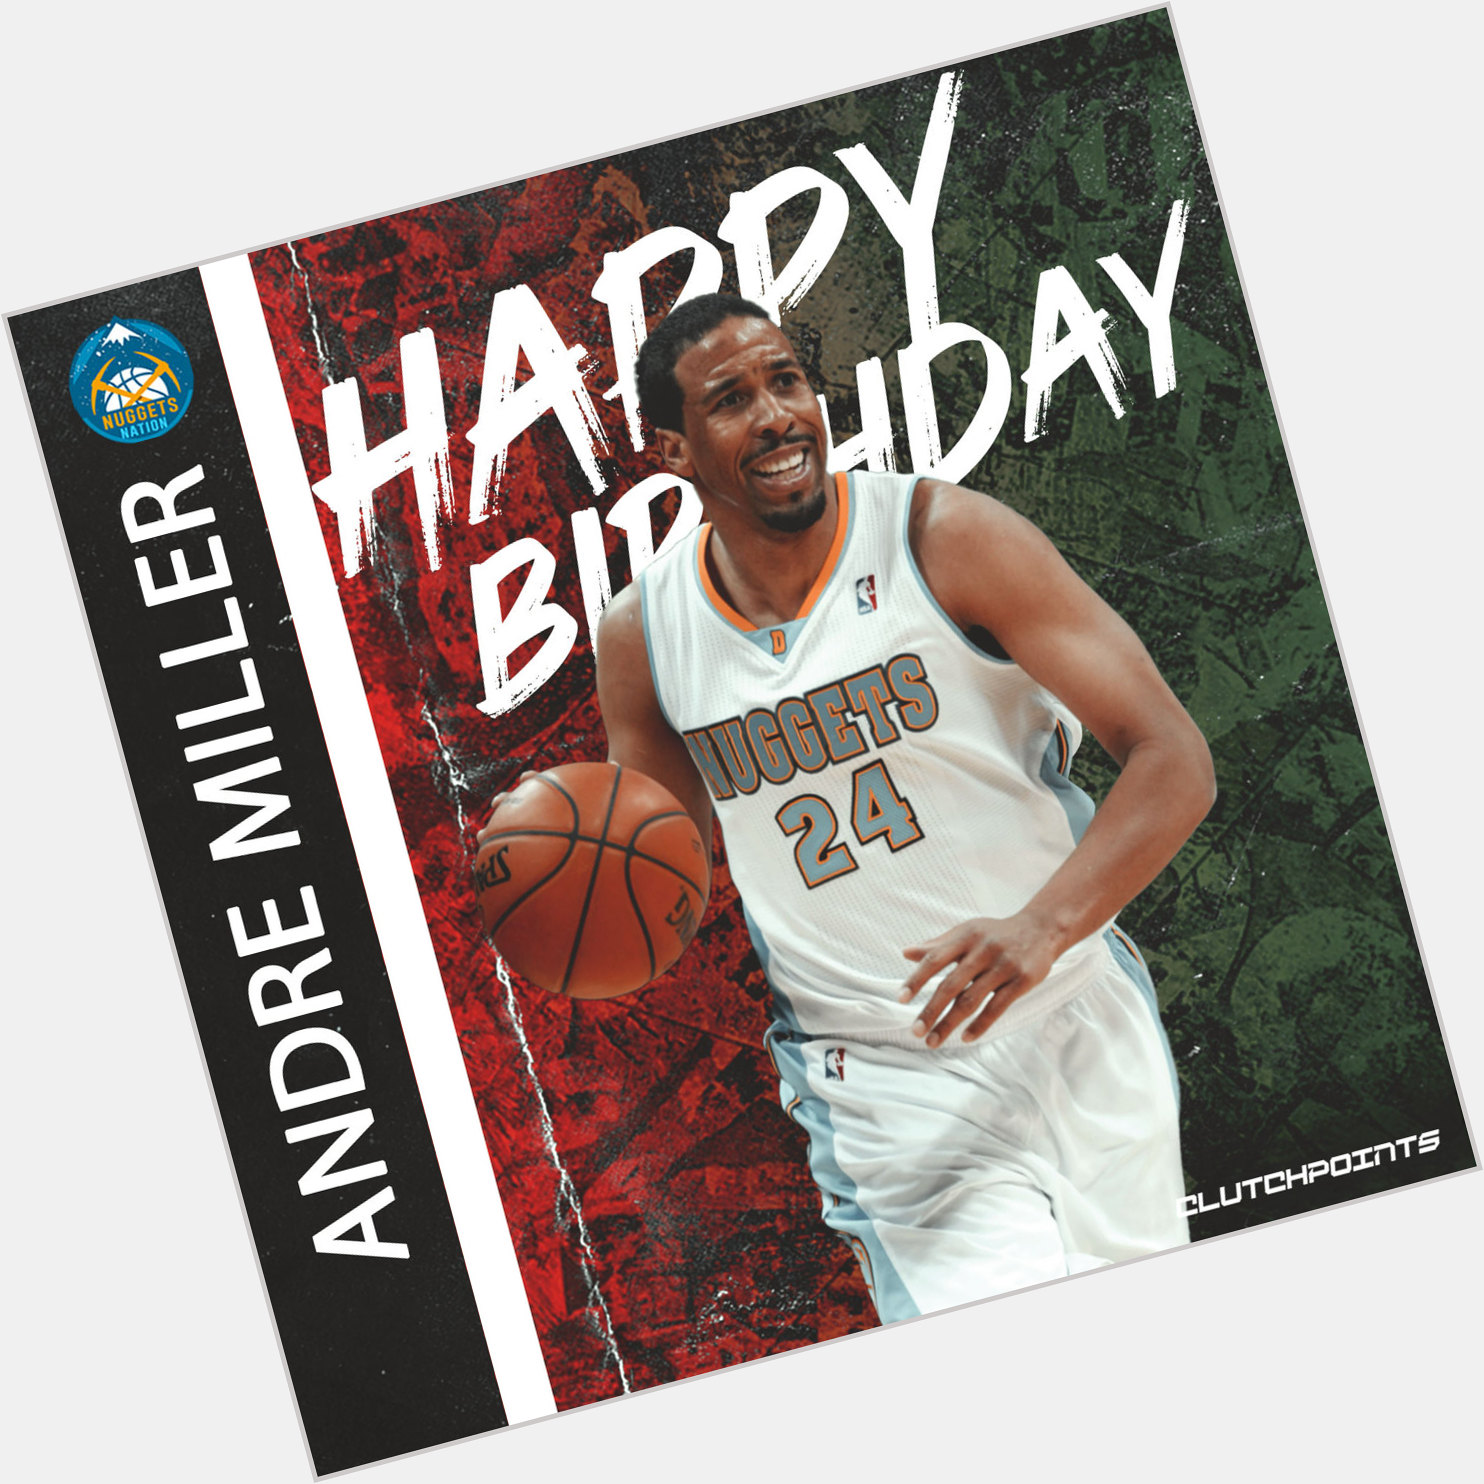 Let s all put greet Andre Miller a Happy Birthday Nuggets nation!  